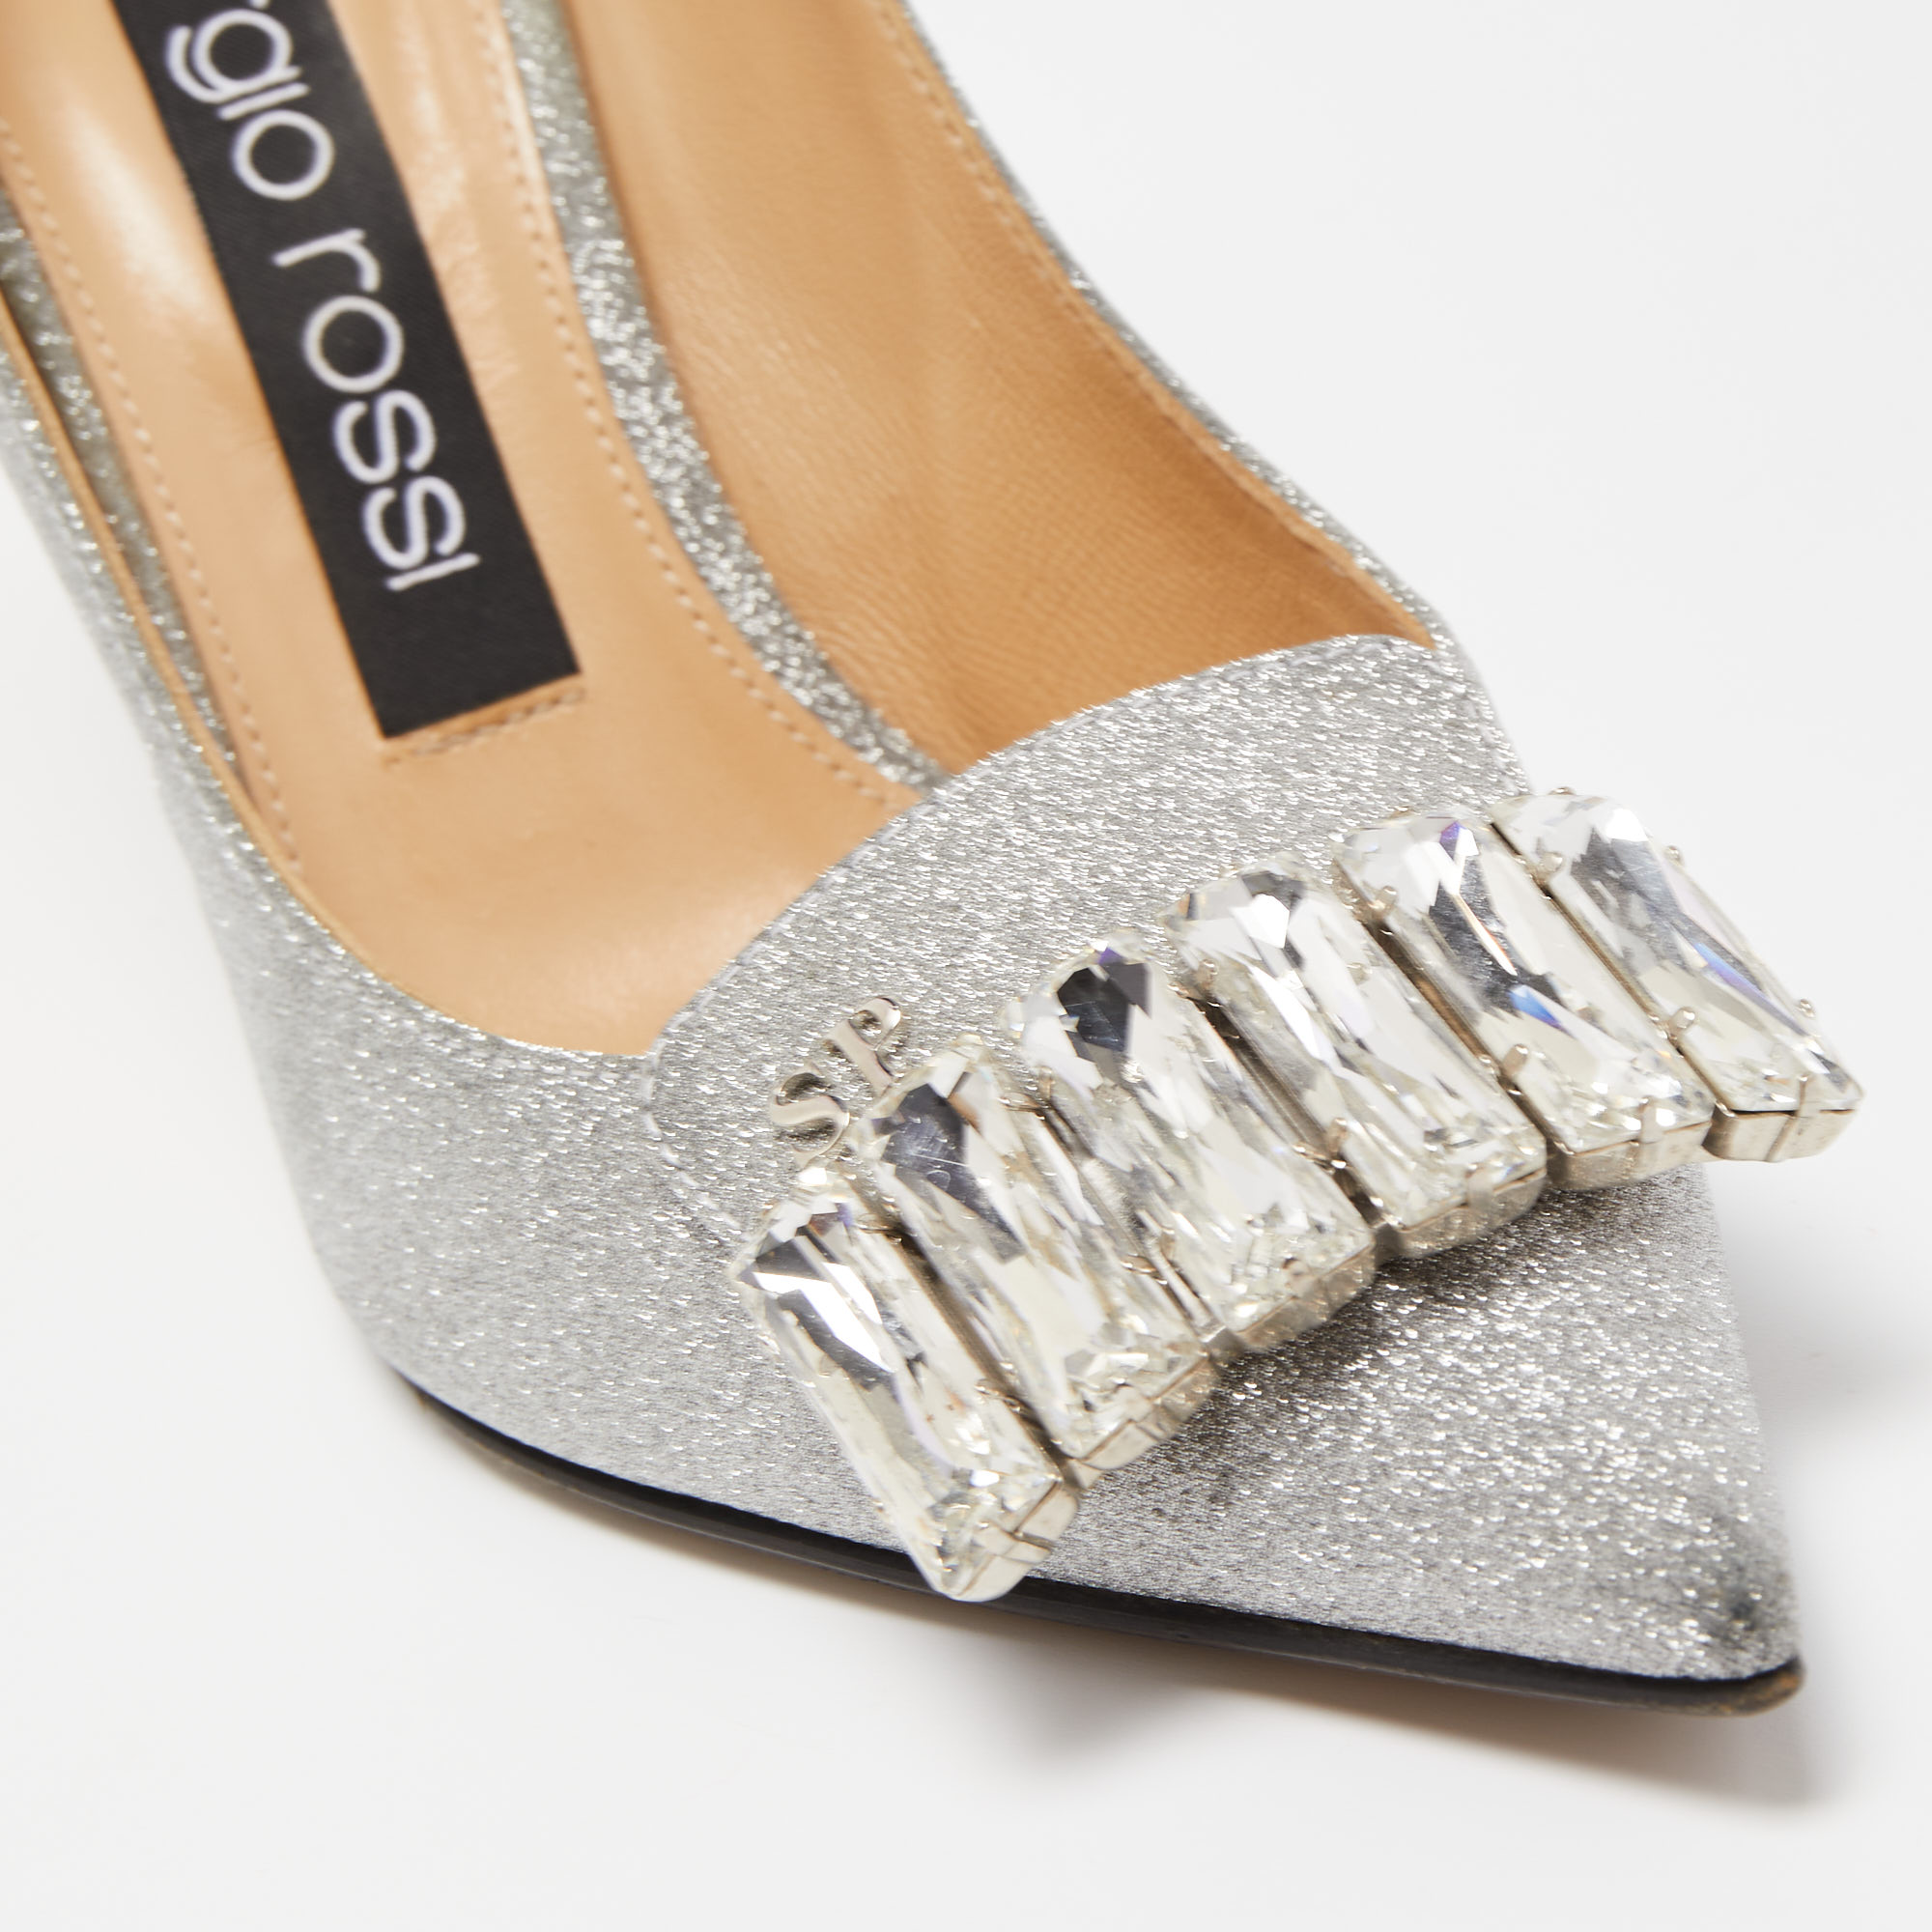 Sergio Rossi Silver Glitter Crystal Embellished Pointed Toe Pumps Size 37